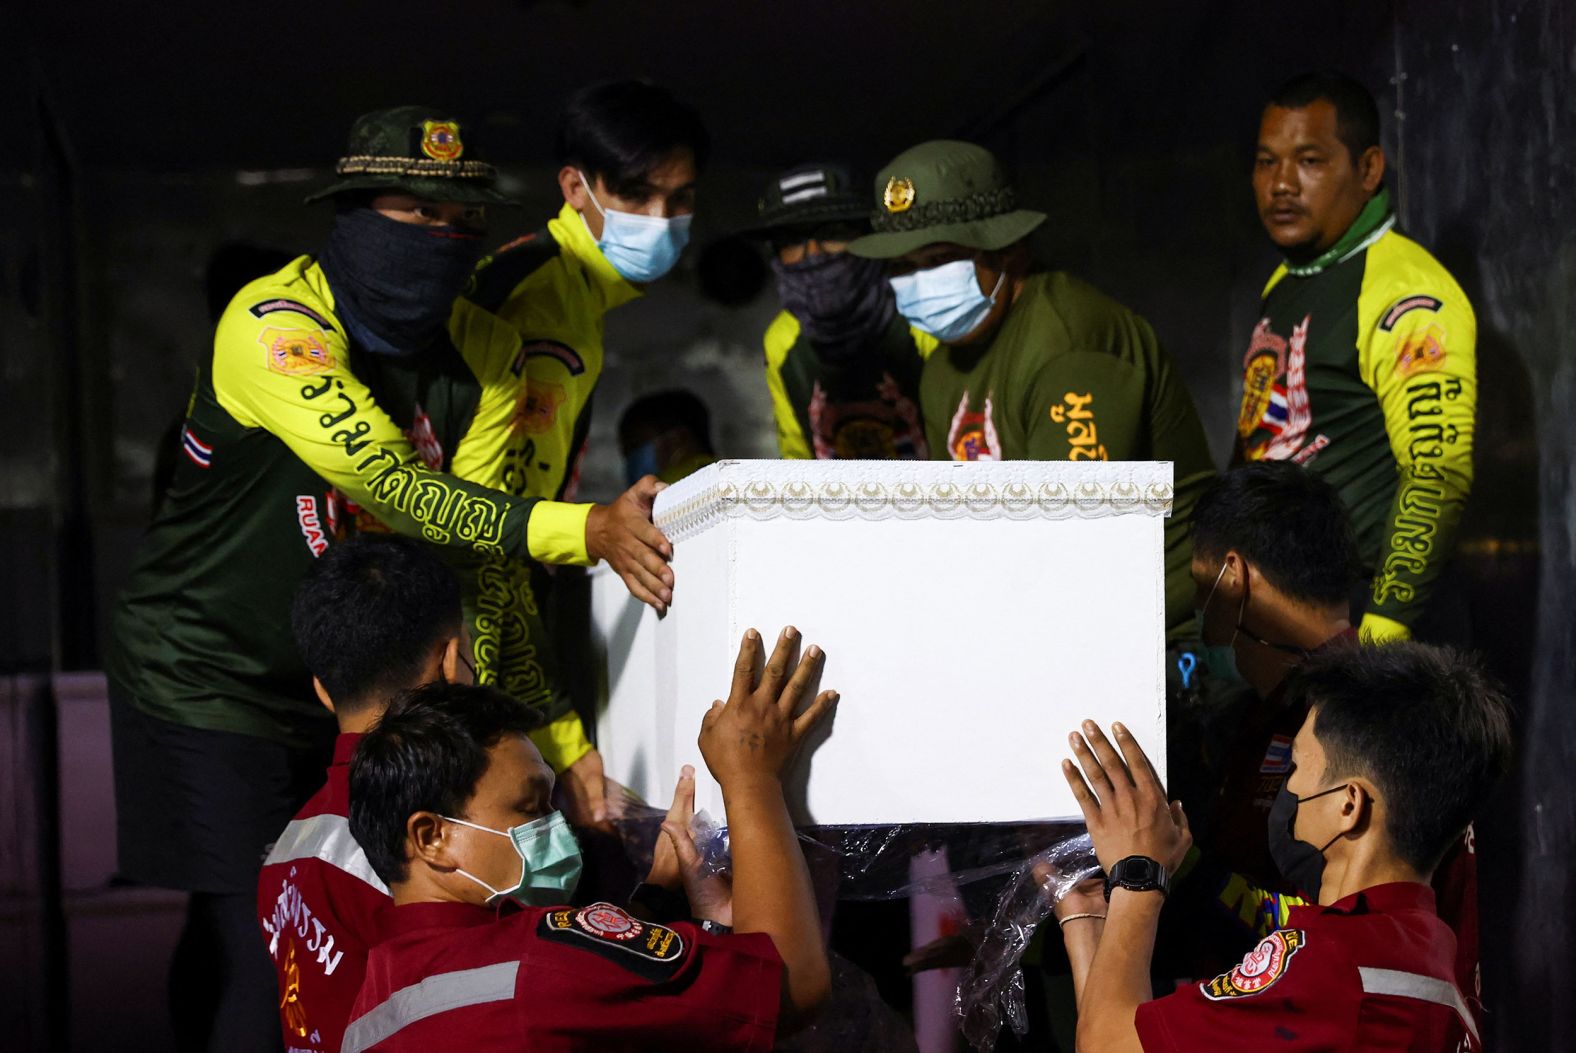 Rescue workers carry coffins containing the bodies of victims outside a hospital after a <a href="https://www.cnn.com/2022/10/06/asia/thailand-mass-shooting-intl-hnk/index.html" target="_blank">massacre at a child care center</a> in northeastern Thailand on Thursday, October 6. Dozens of children were among the victims.